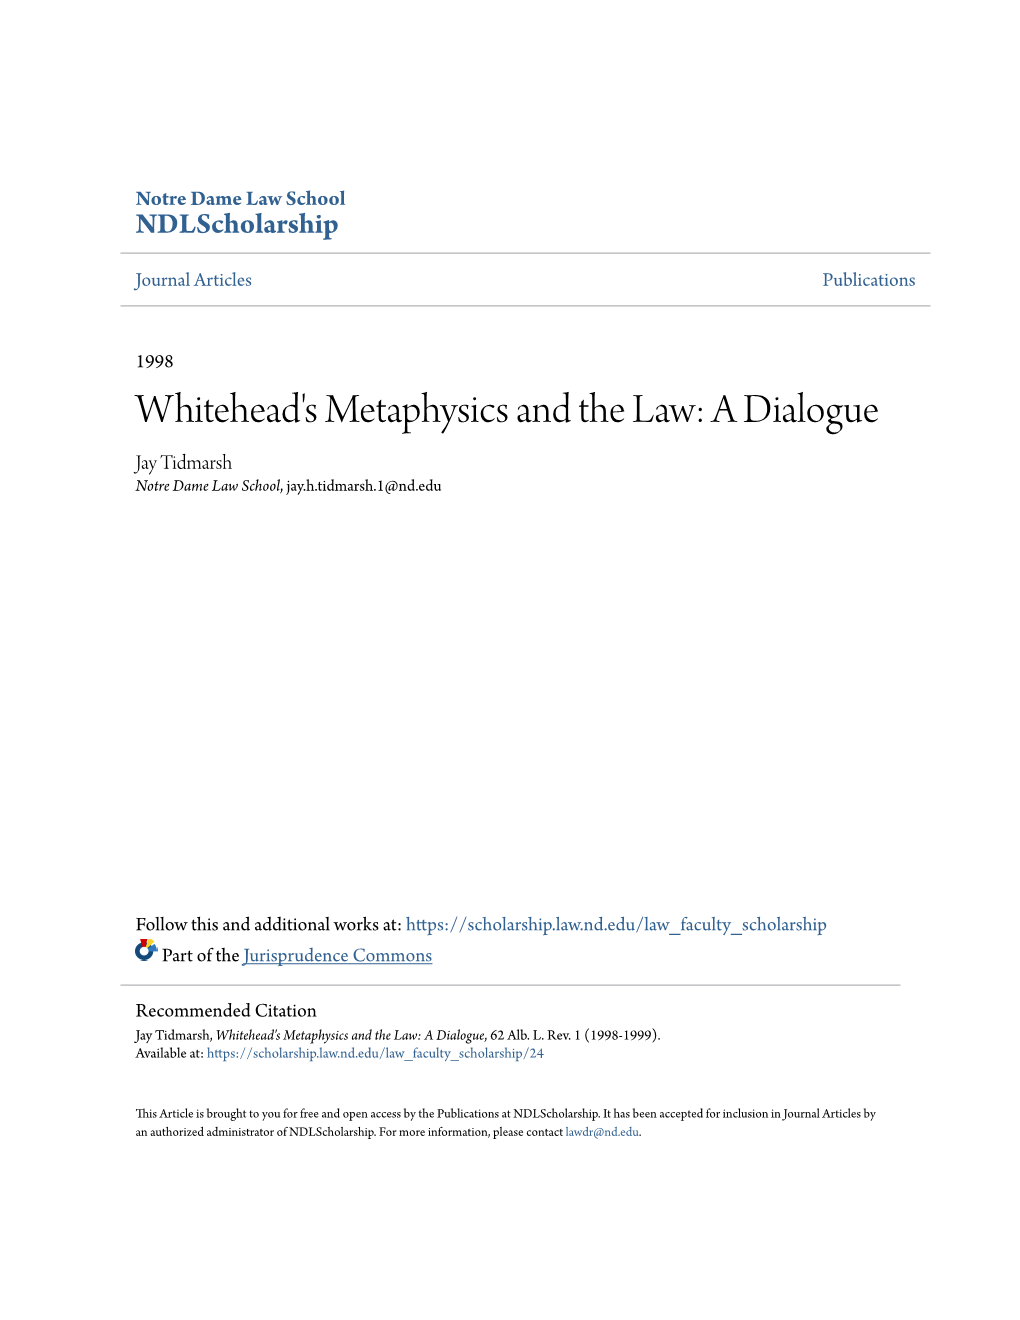 Whitehead's Metaphysics and the Law: a Dialogue Jay Tidmarsh Notre Dame Law School, Jay.H.Tidmarsh.1@Nd.Edu